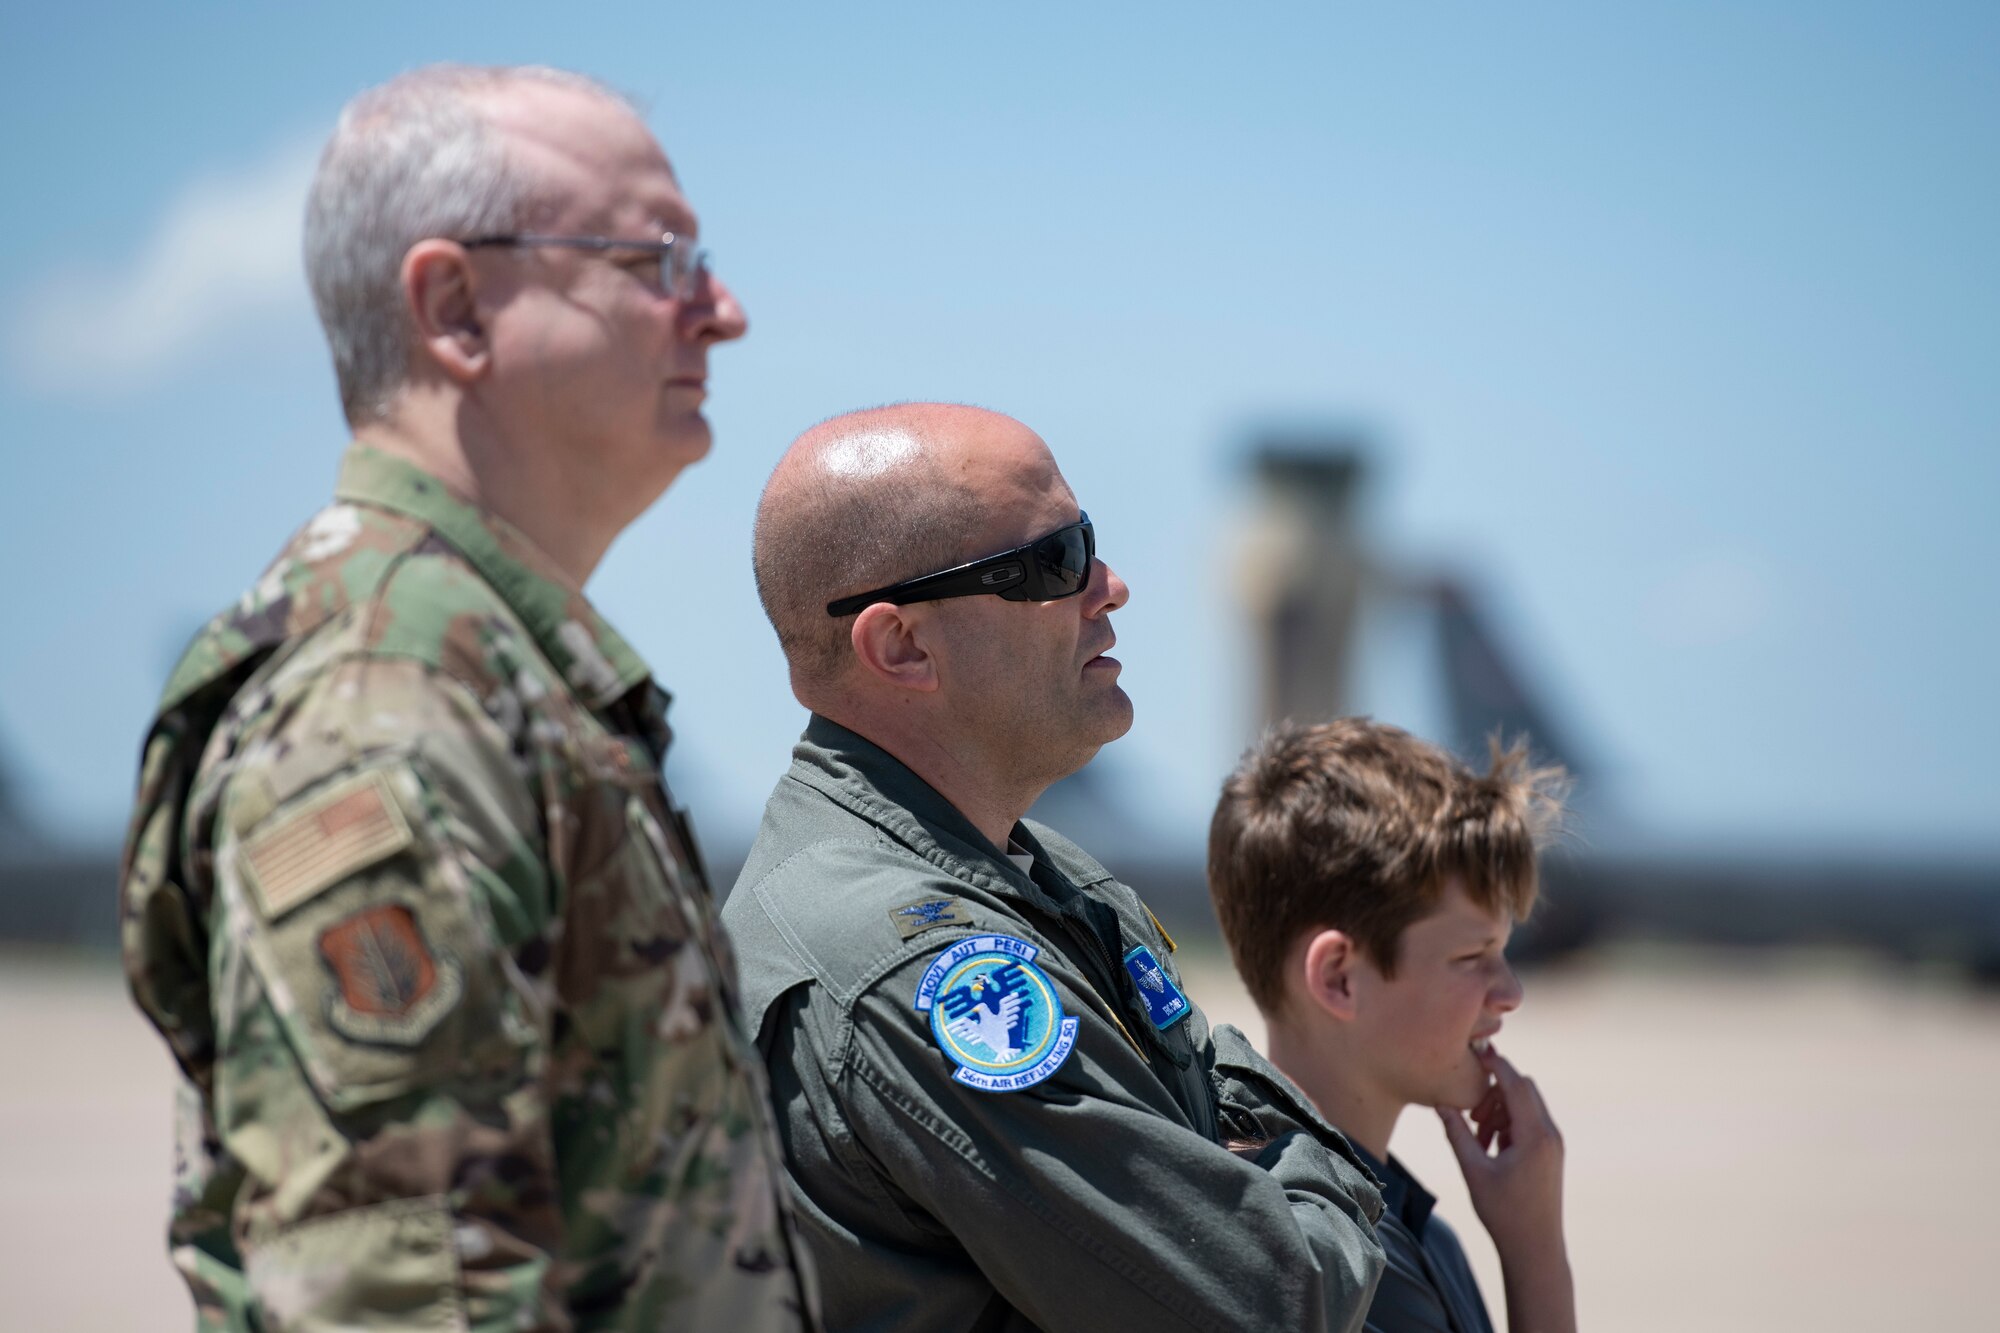 U.S. Air Force Col. Eric Carney, 97th Air Mobility Wing Commander, watches as the fourth KC-46 Pegasus taxis down the flight line, May 18, 2019, at Altus Air Force Base, Okla. This plane is the fourth KC-46 for Altus AFB to receive. (U.S. Air Force photo by Airman 1st Class Breanna Klemm)